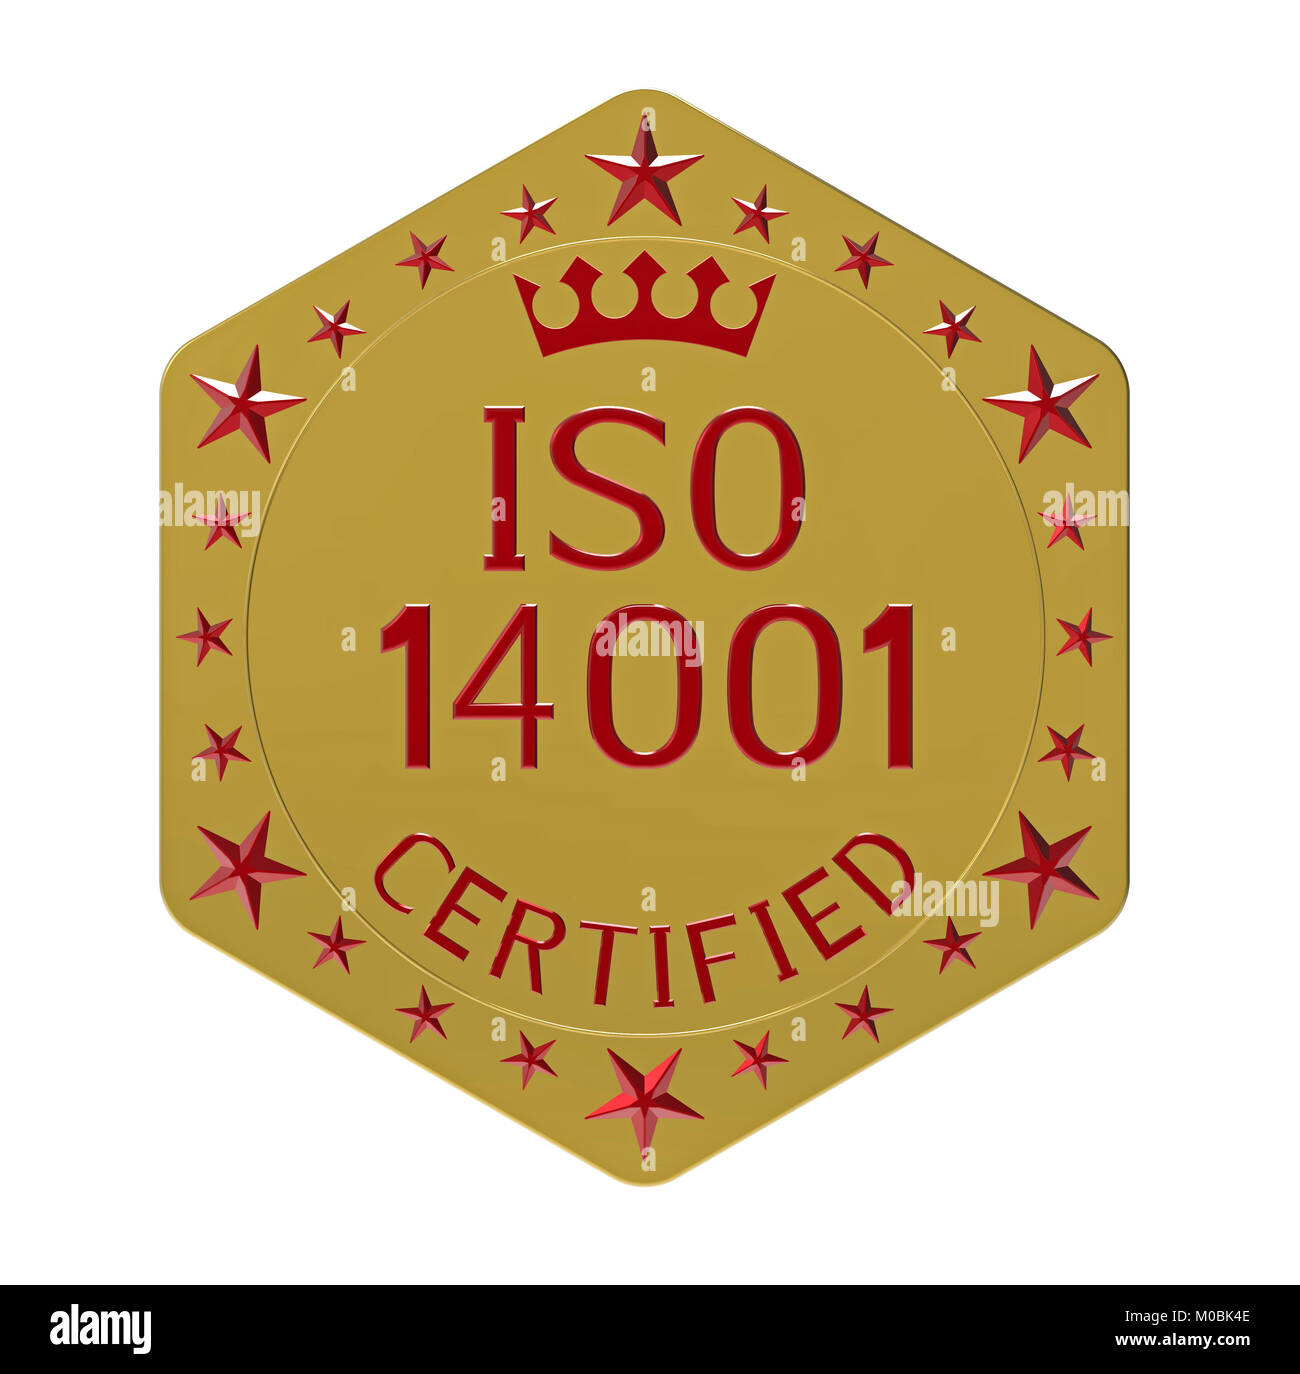 ISO 14001 standard, environmental management system, 3D render, isolated on white Stock Photo